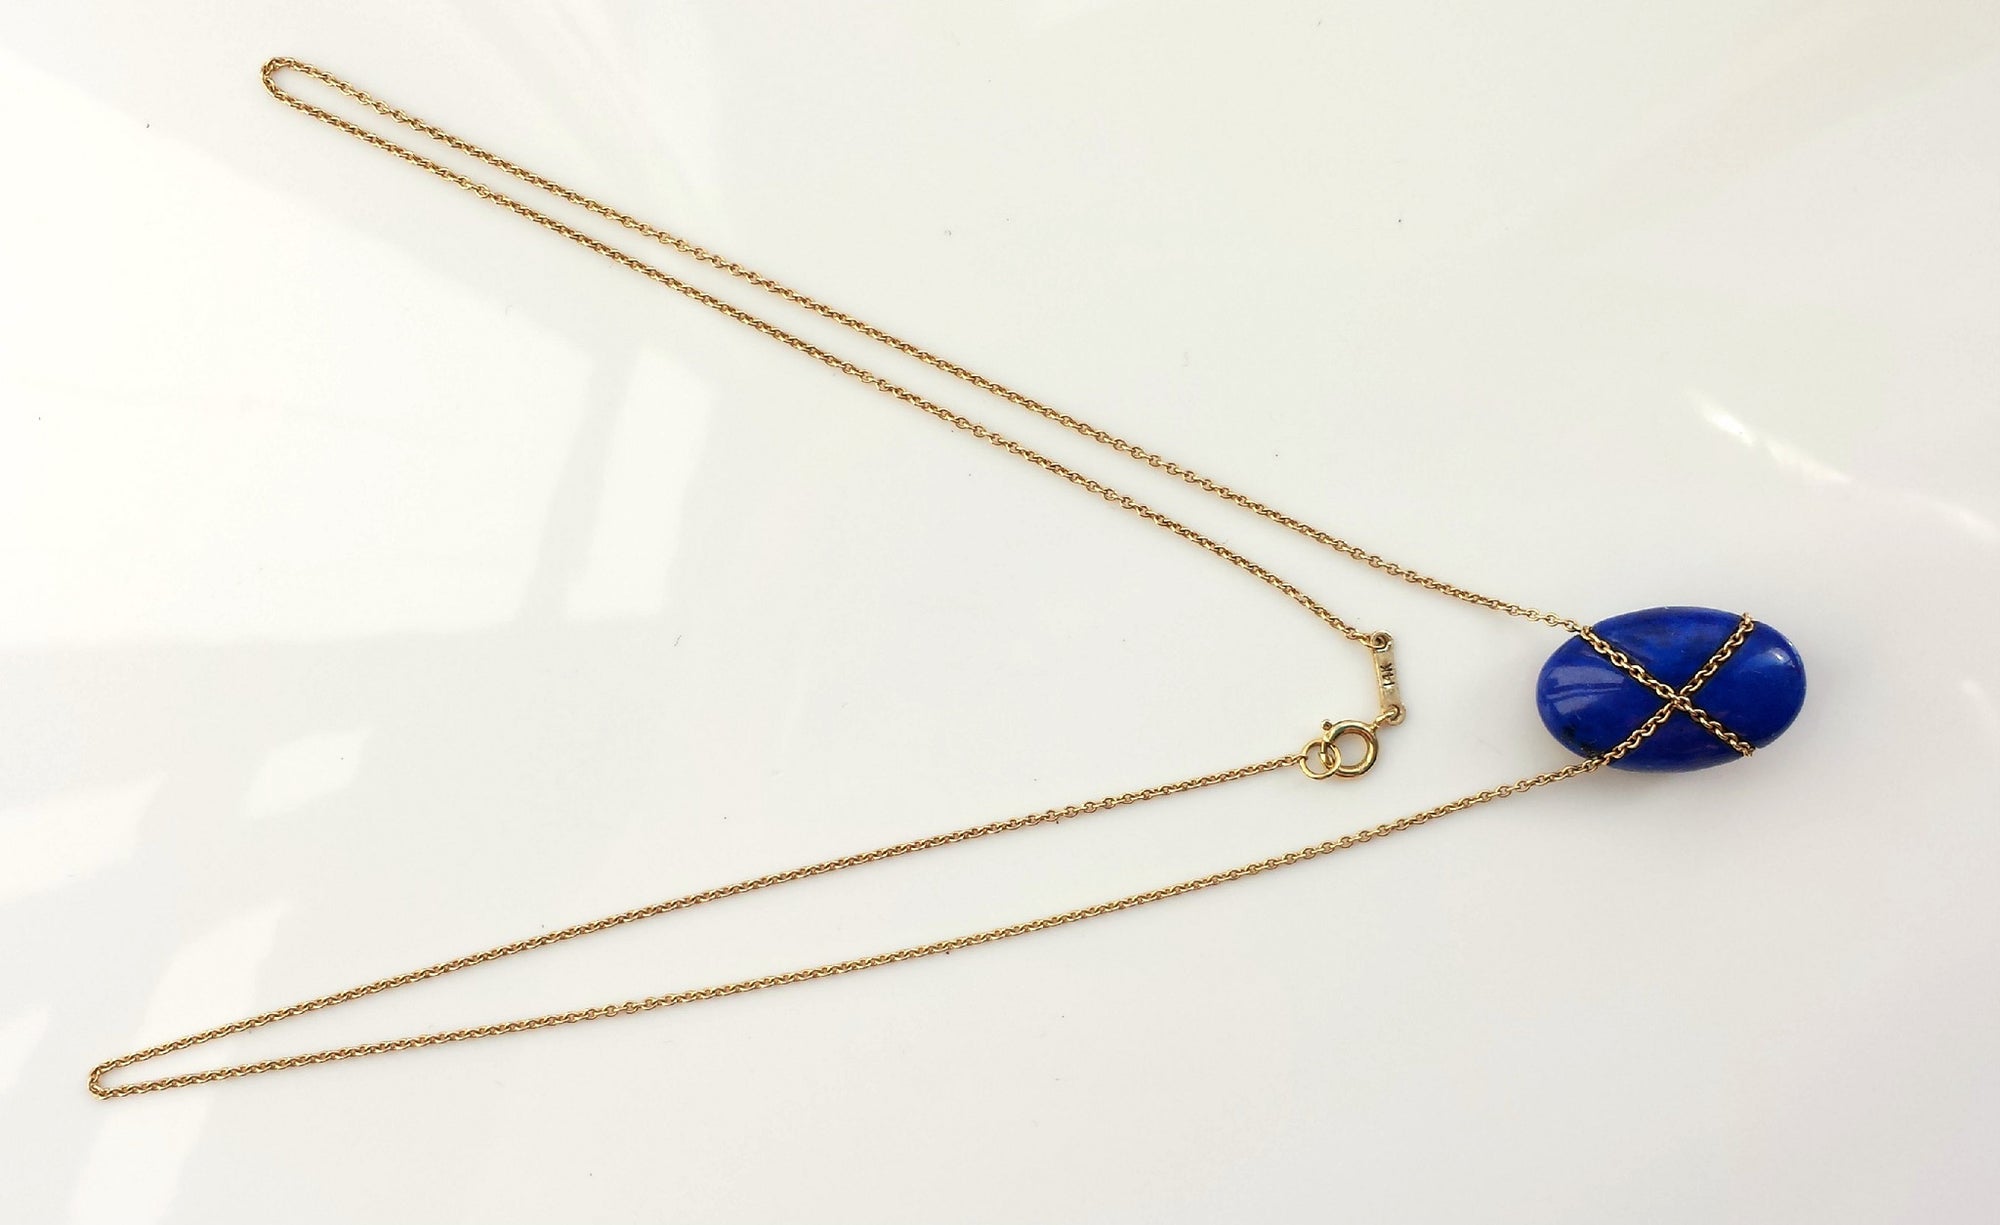 Vintage Tiffany & Co. Lapis Lazuli Bean Pendant / Necklace with 18in Gold Chain